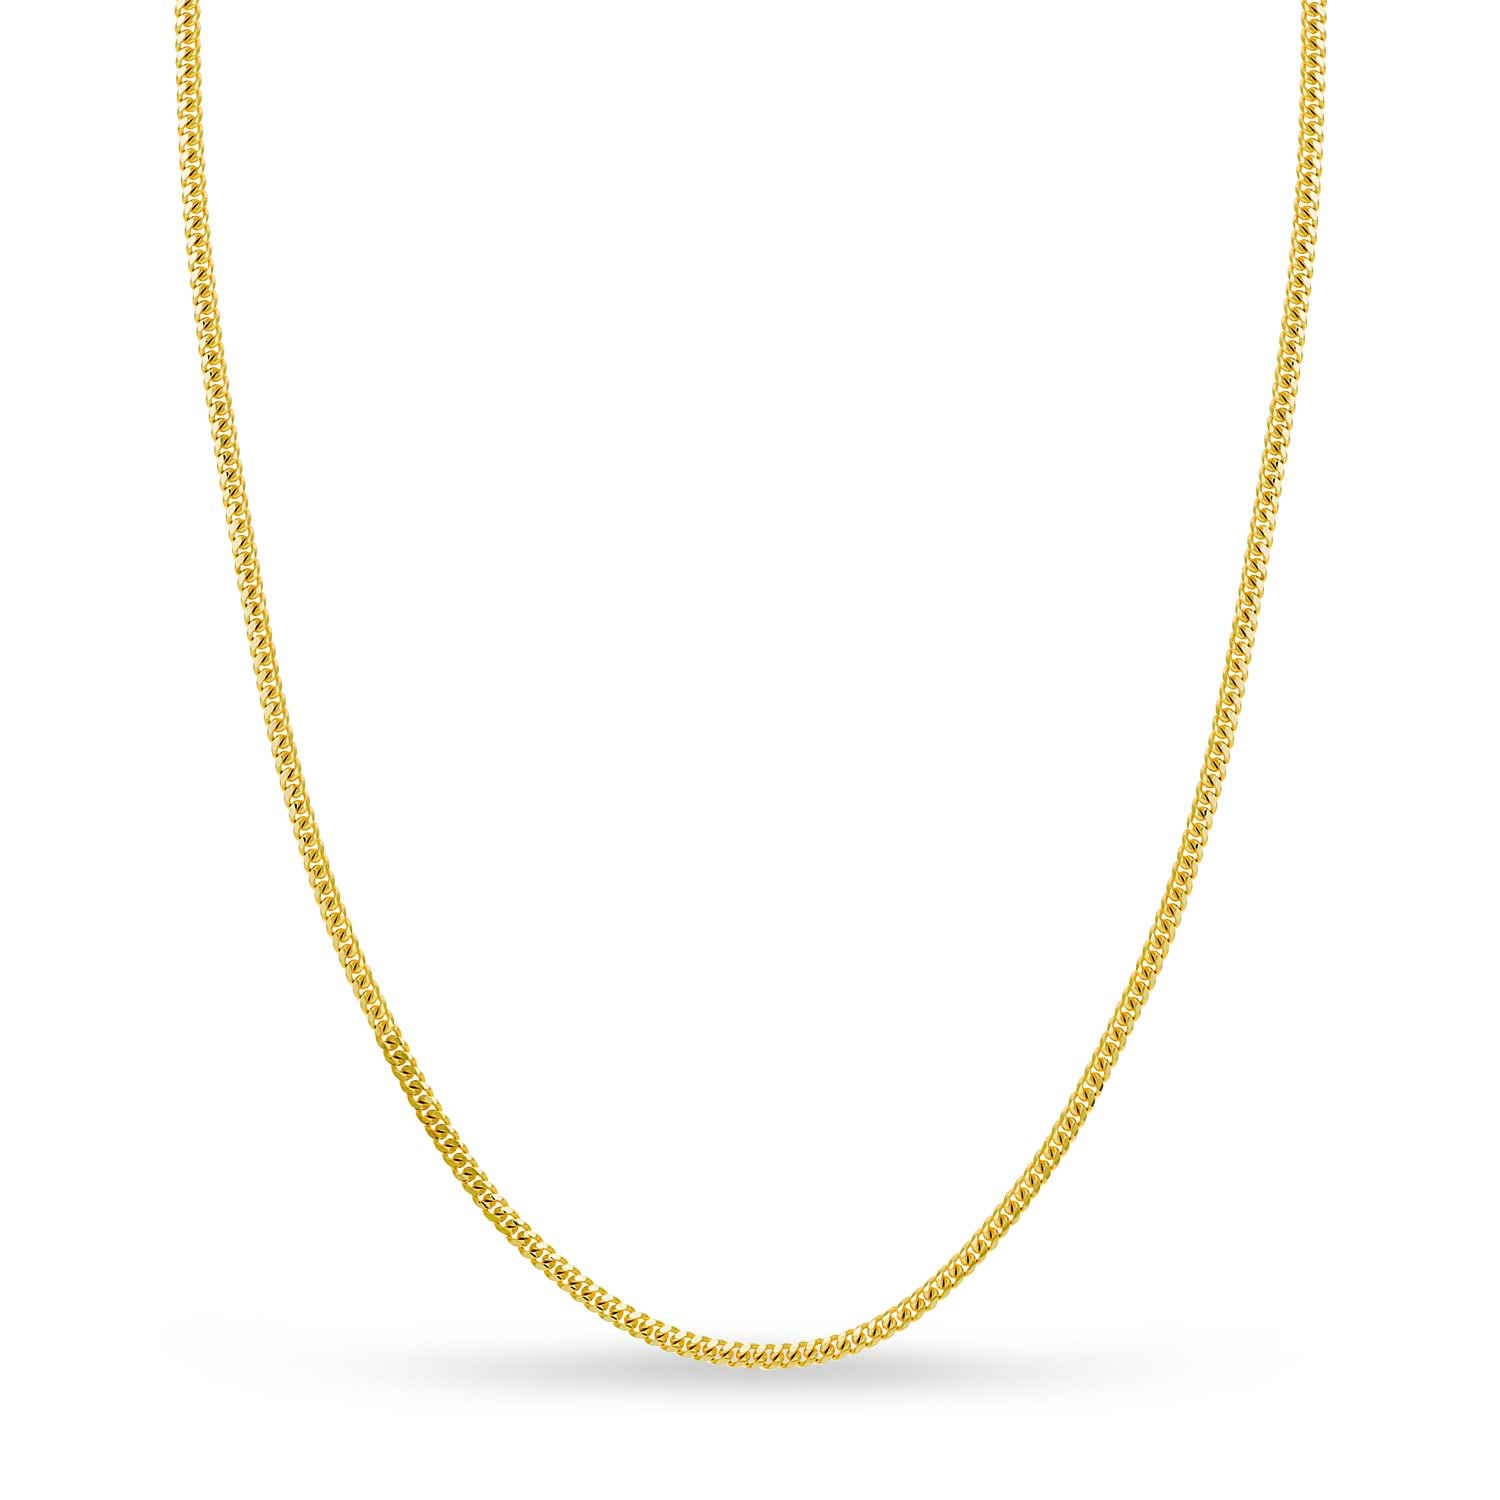 Small Miami Cuban Chain Necklace 14k Yellow Gold